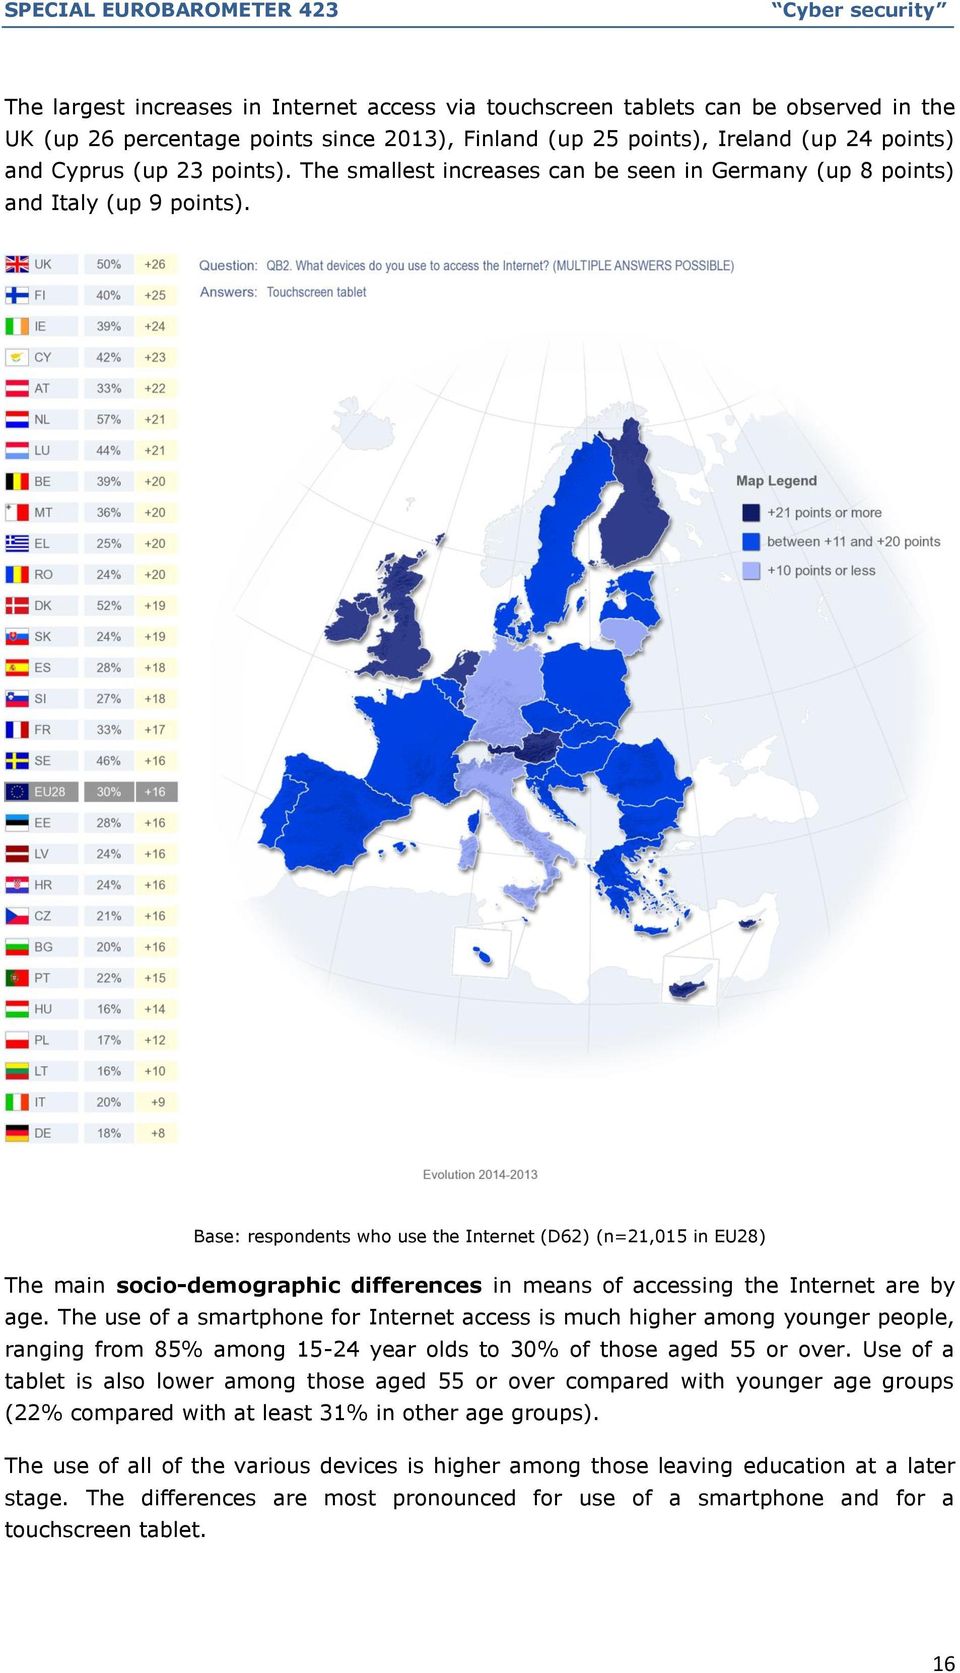 Base: respondents who use the Internet (D62) (n=21,015 in EU28) The main socio-demographic differences in means of accessing the Internet are by age.